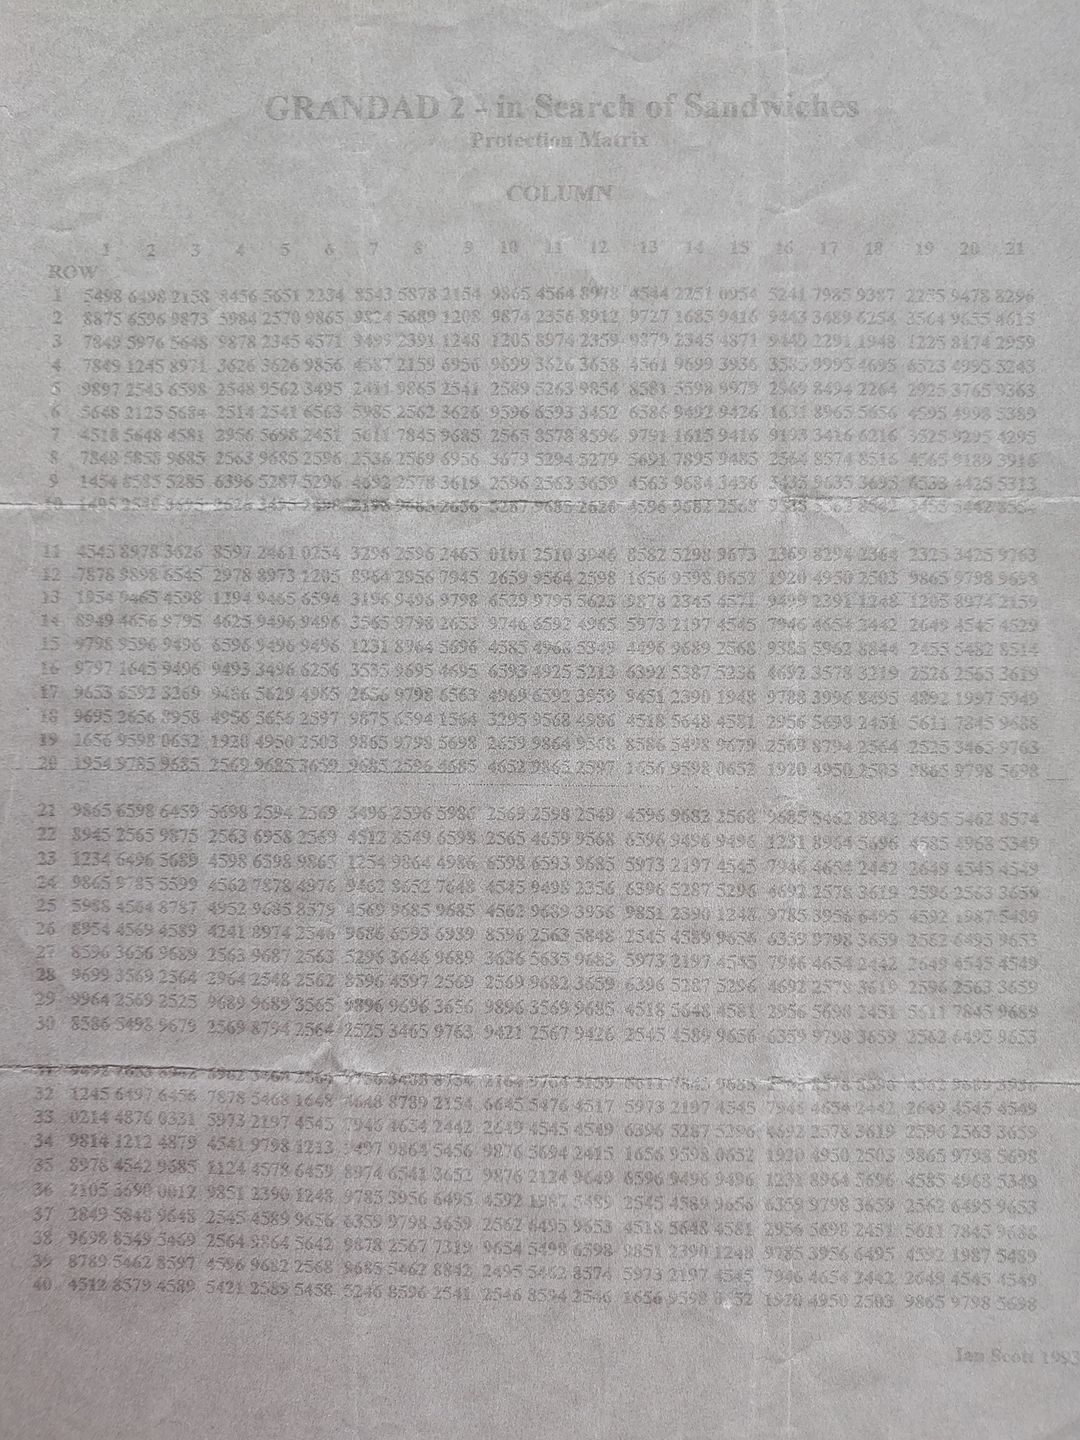 This is a copy of the code sheet for the second game. The original had a red background with black text to make photocopying harder.